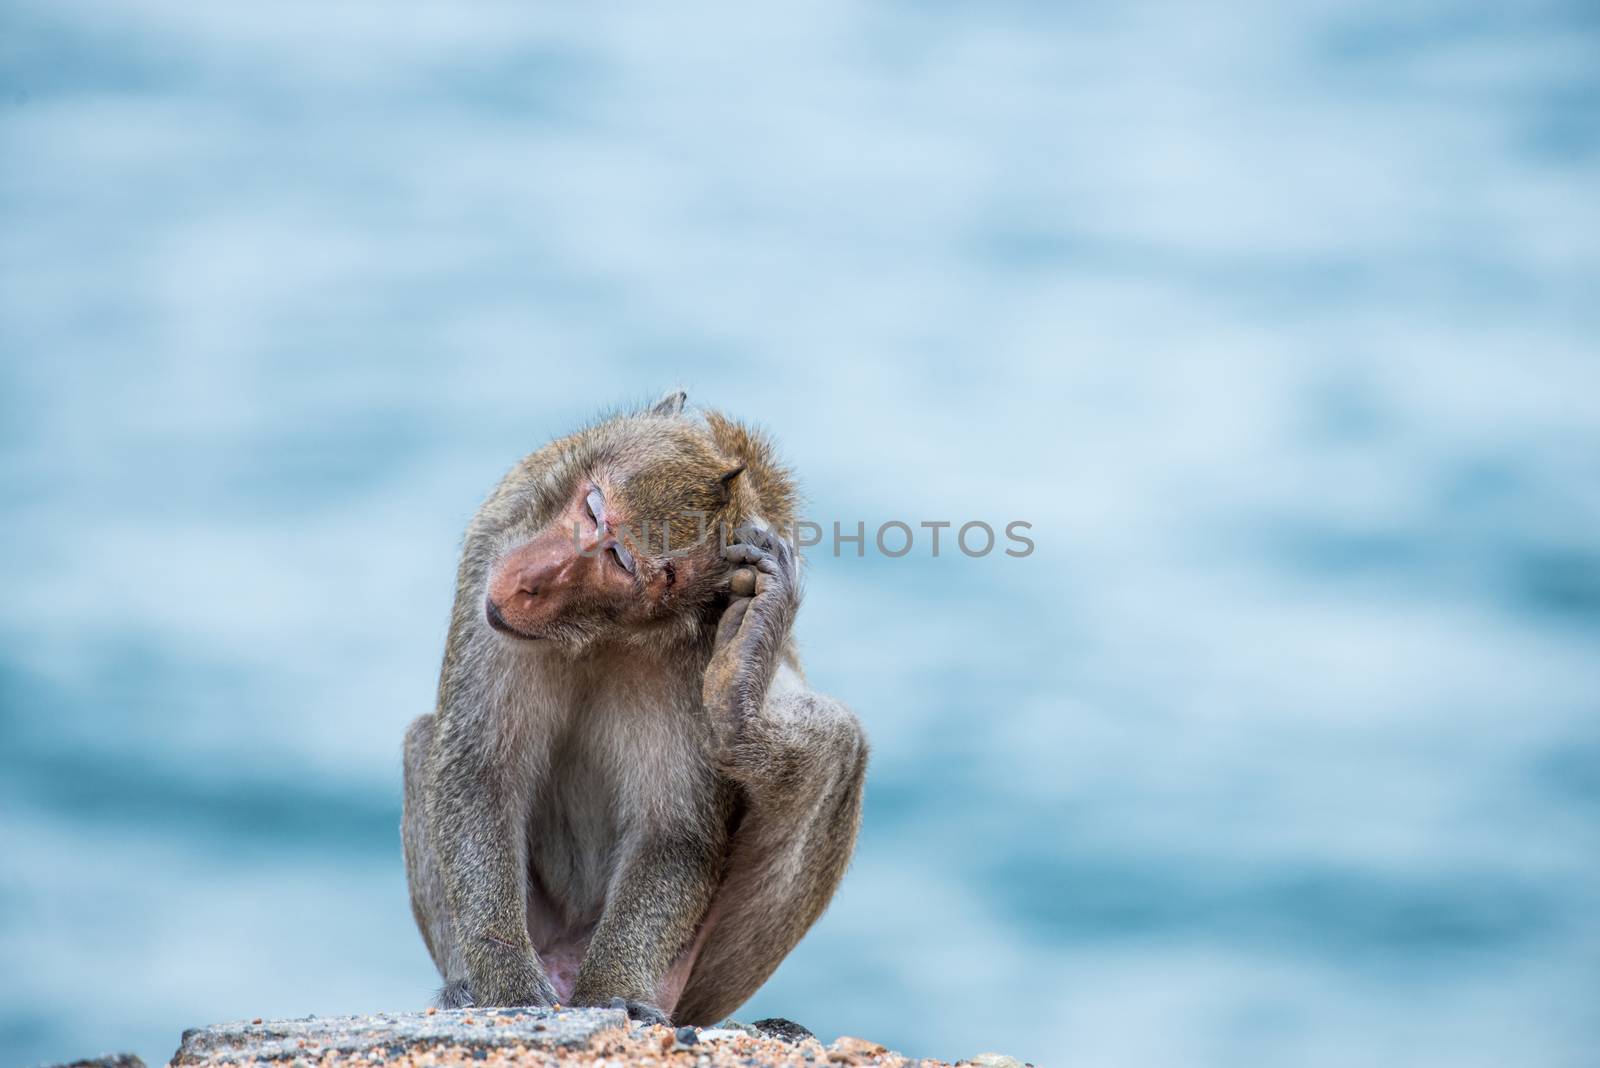 monkey scratching head, sitting on the sand with sea background by antpkr